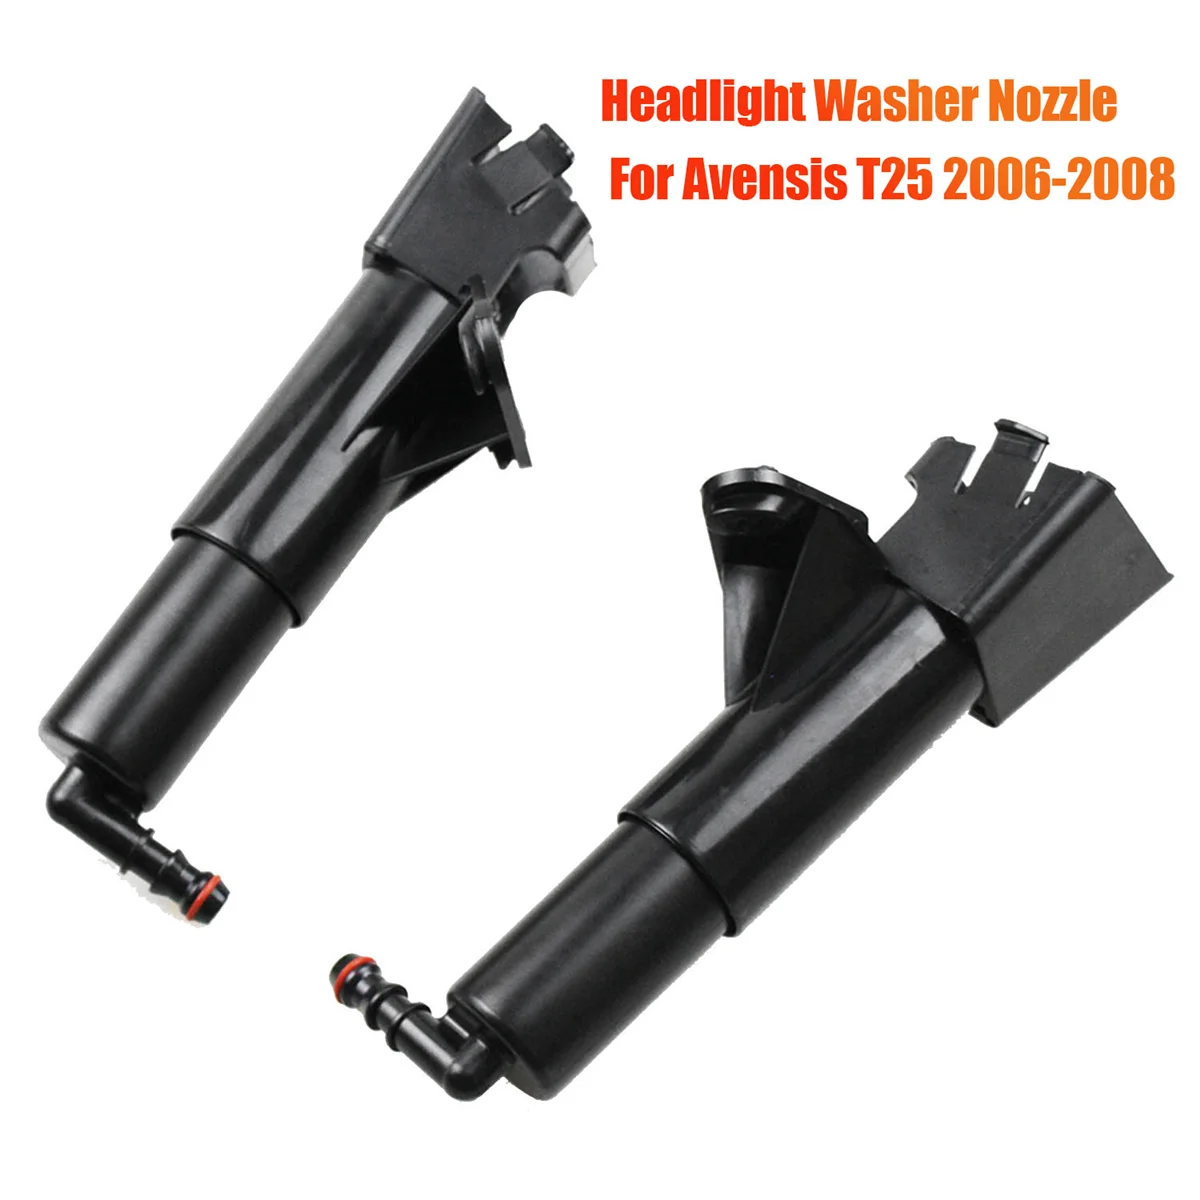 

Right Car Headlight Washer Nozzle Spray Head Light Lamp Cleaning 85207-05021 for Toyota Avensis T25 2006-2008